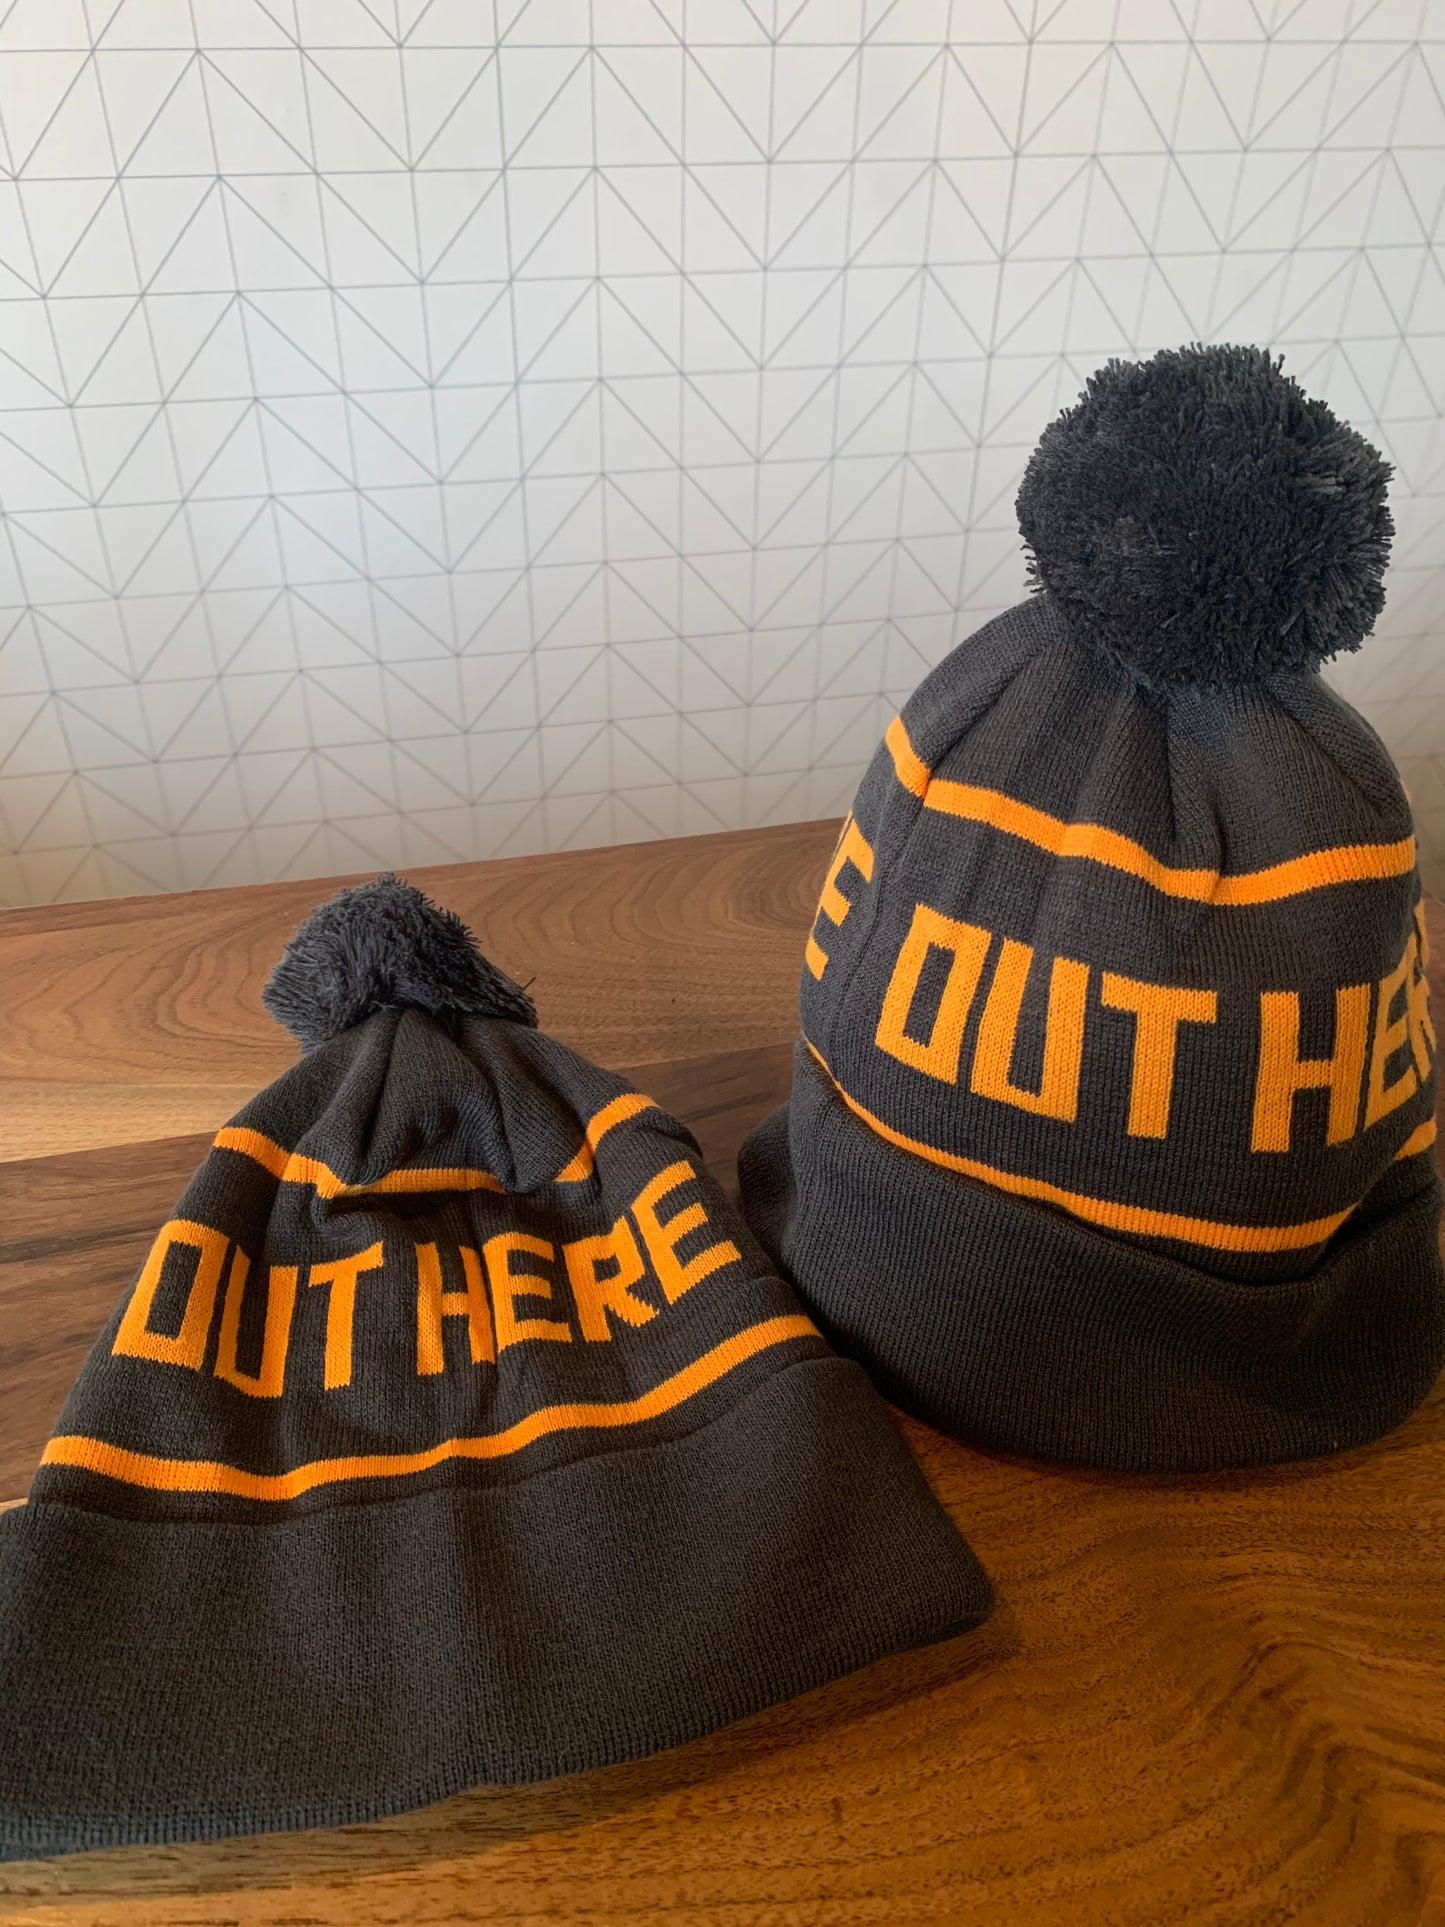 Out Here Yoga Knit Beanie